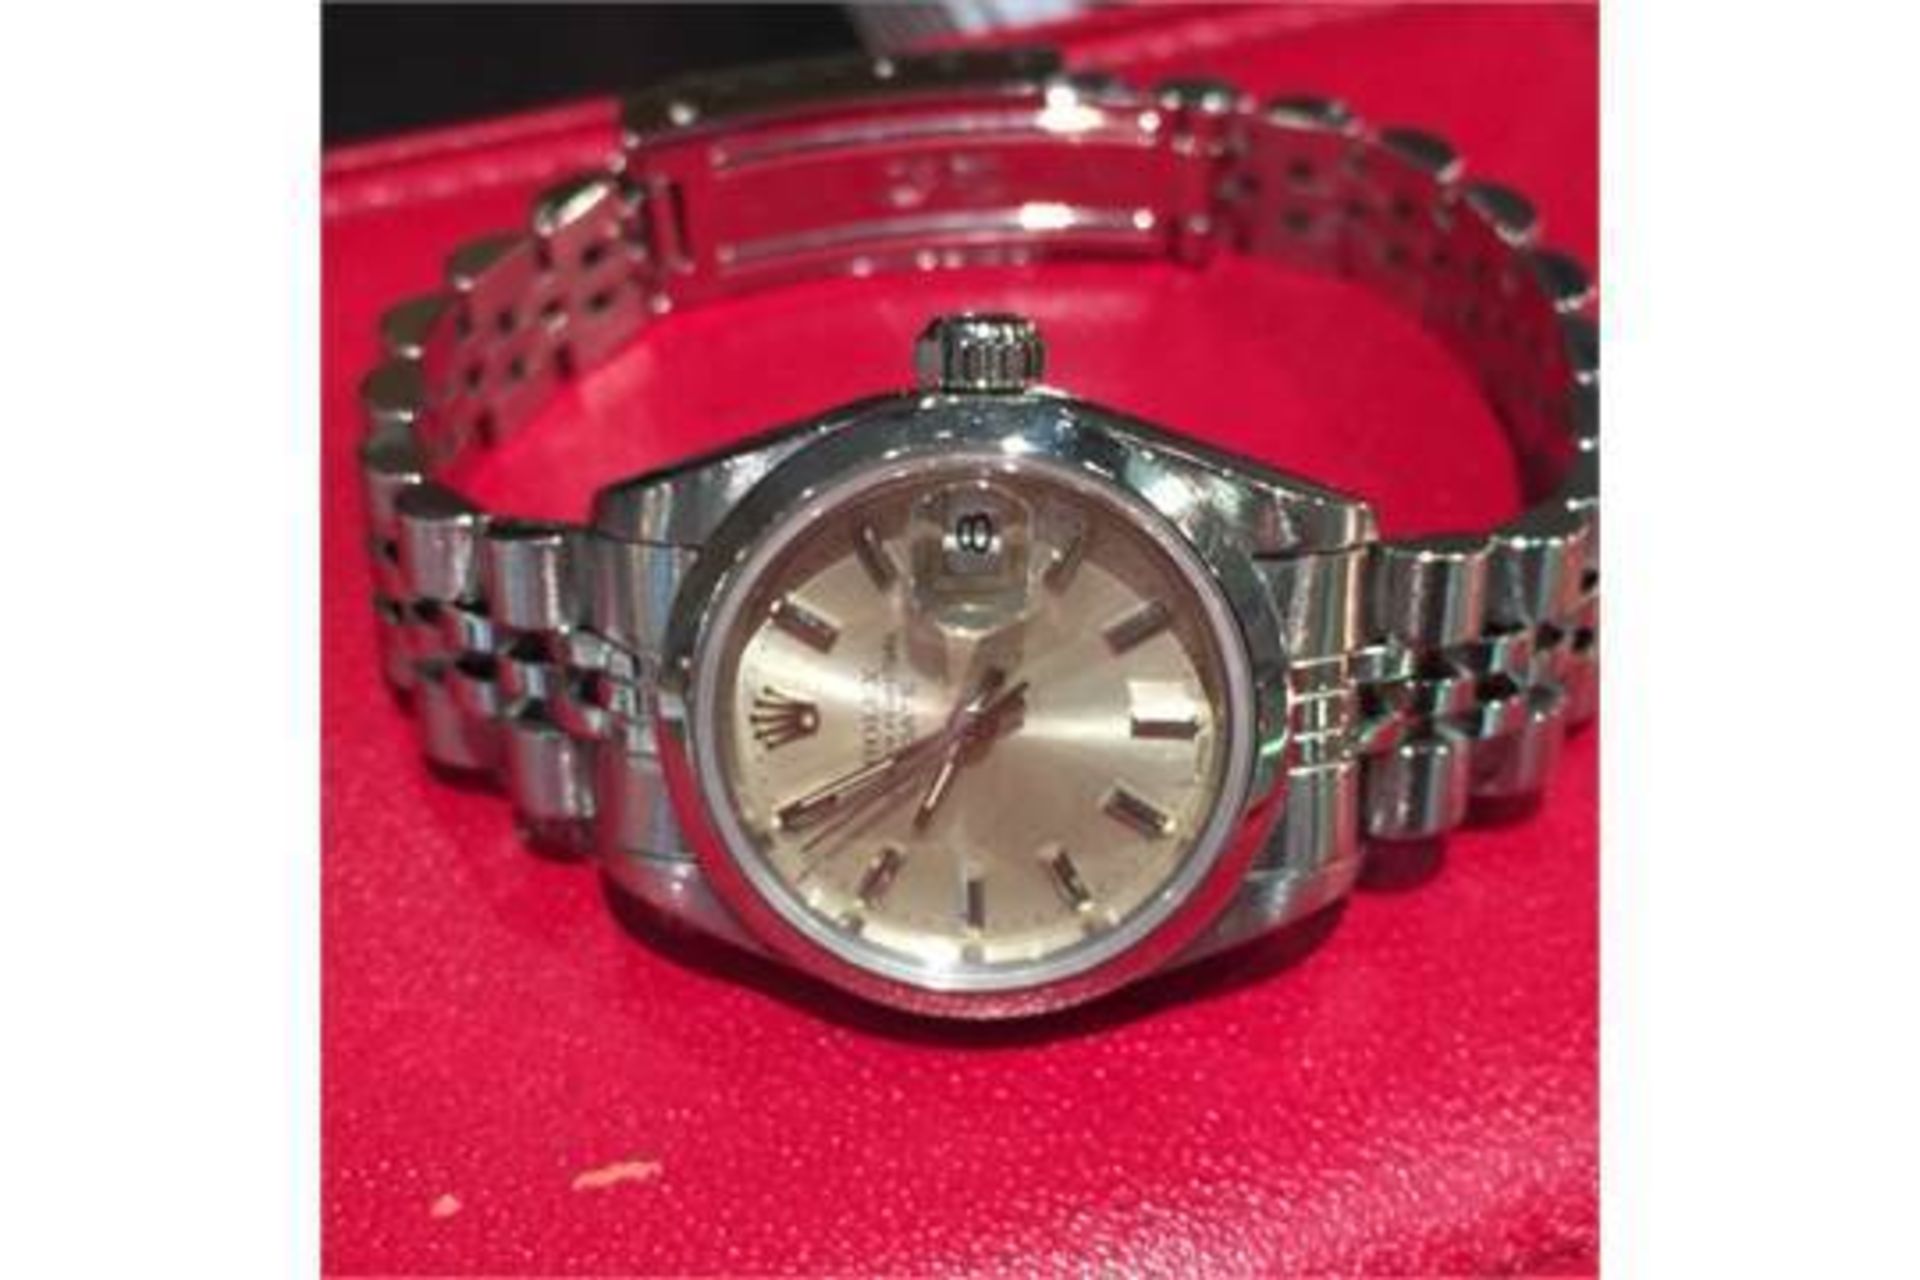 LADIES ROLEX STAINLESS STEEL DATEJUST, FULL STAINLESS STEEL STRAP, DIAL AND CASE, FULLY WORKING - Image 3 of 5